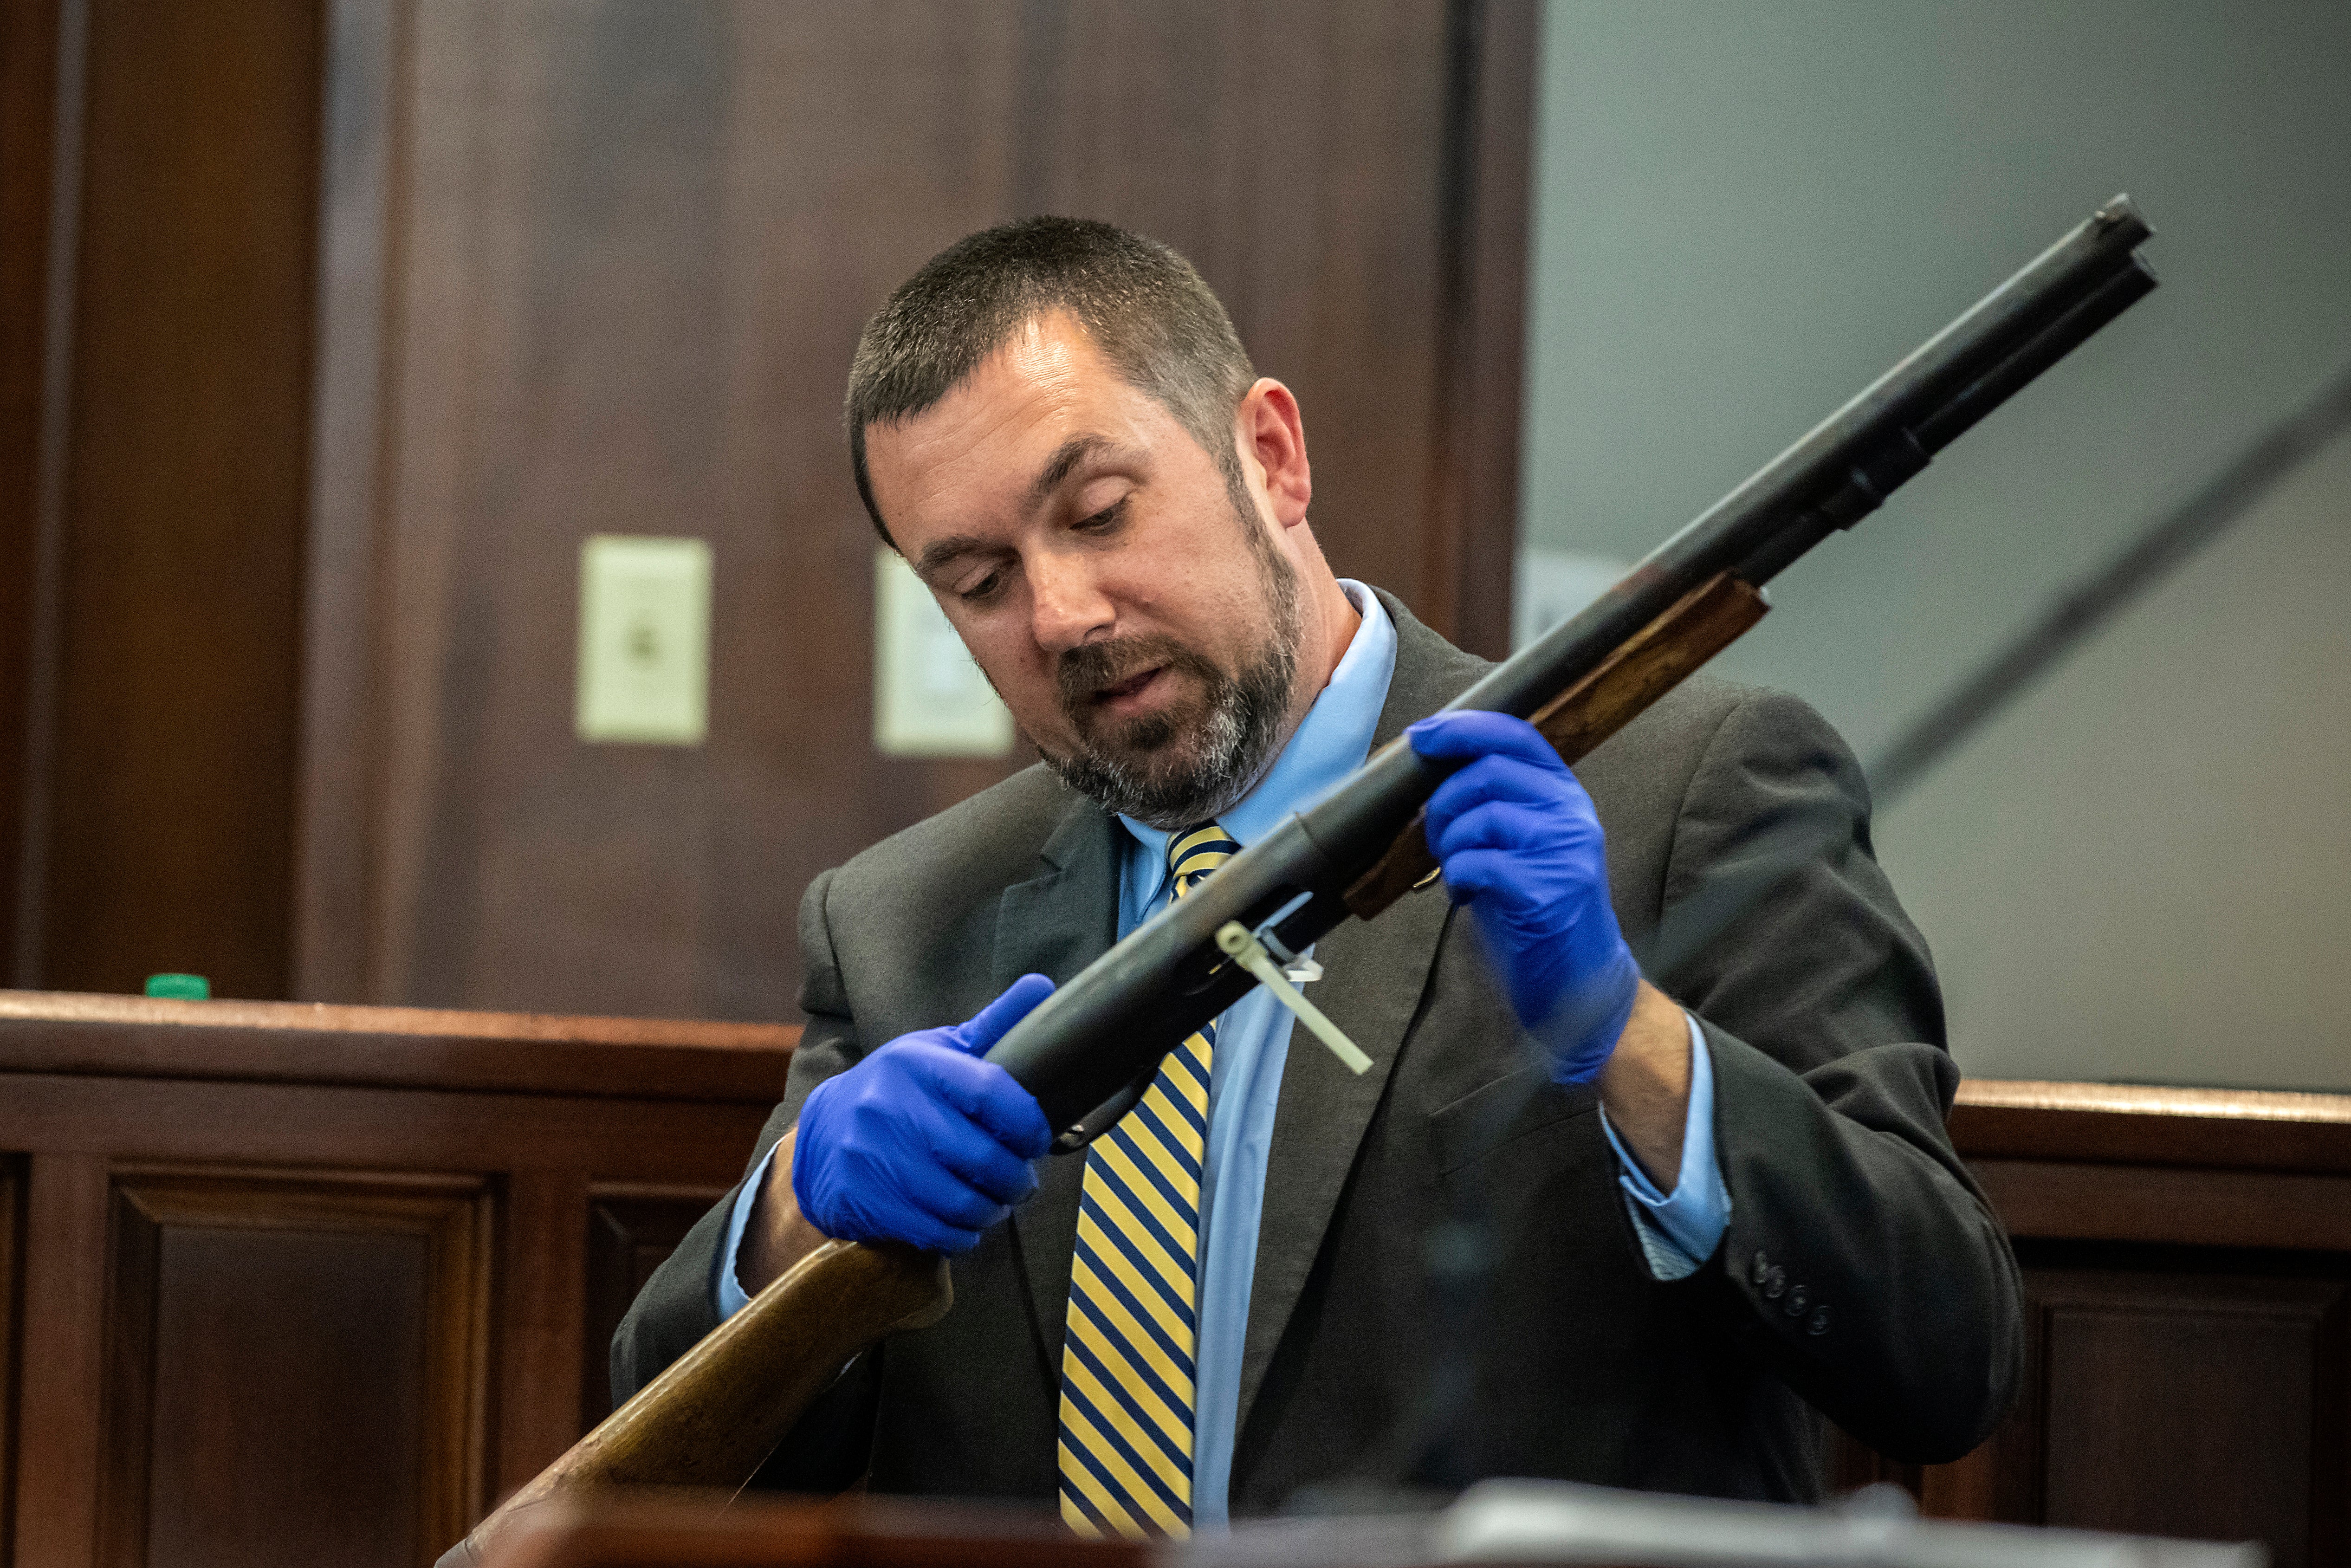 The shotgun used to kill Ahmaud Arbery is seen during the trial of Gregory and Travis McMichael and William “Roddie” Bryan Jr